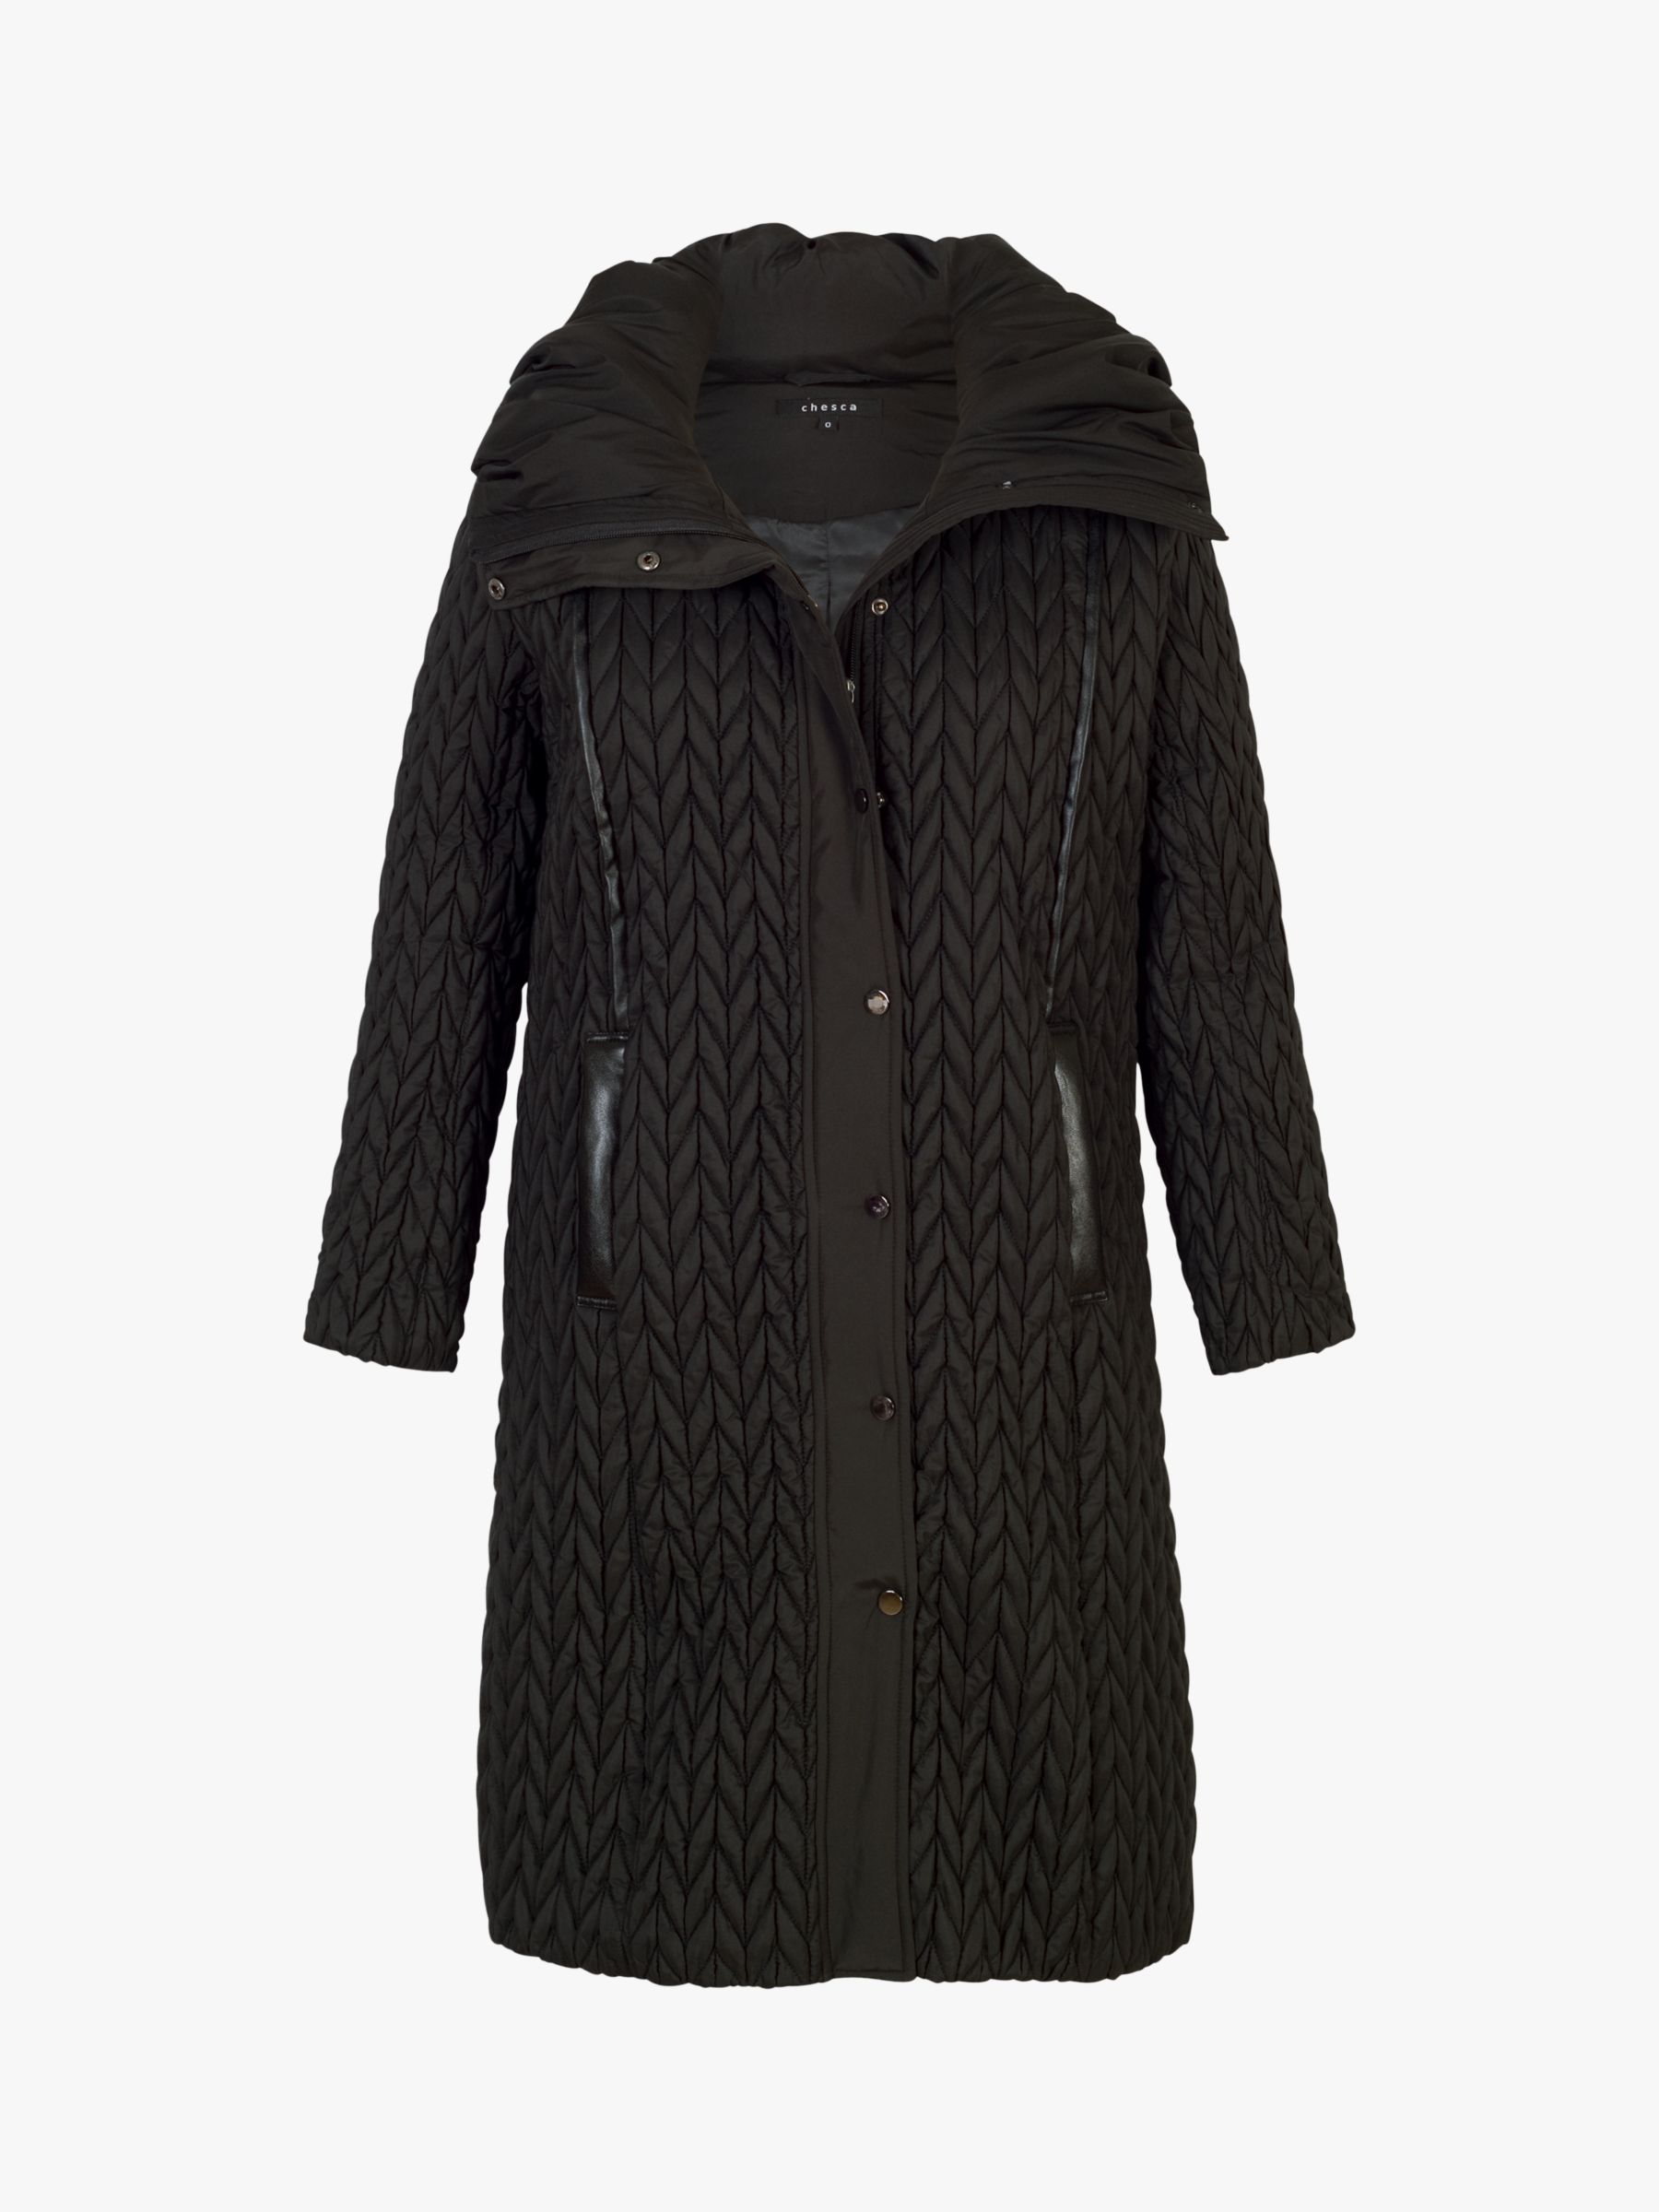 Chesca Cable Quilted Long Coat, Black, 12-14